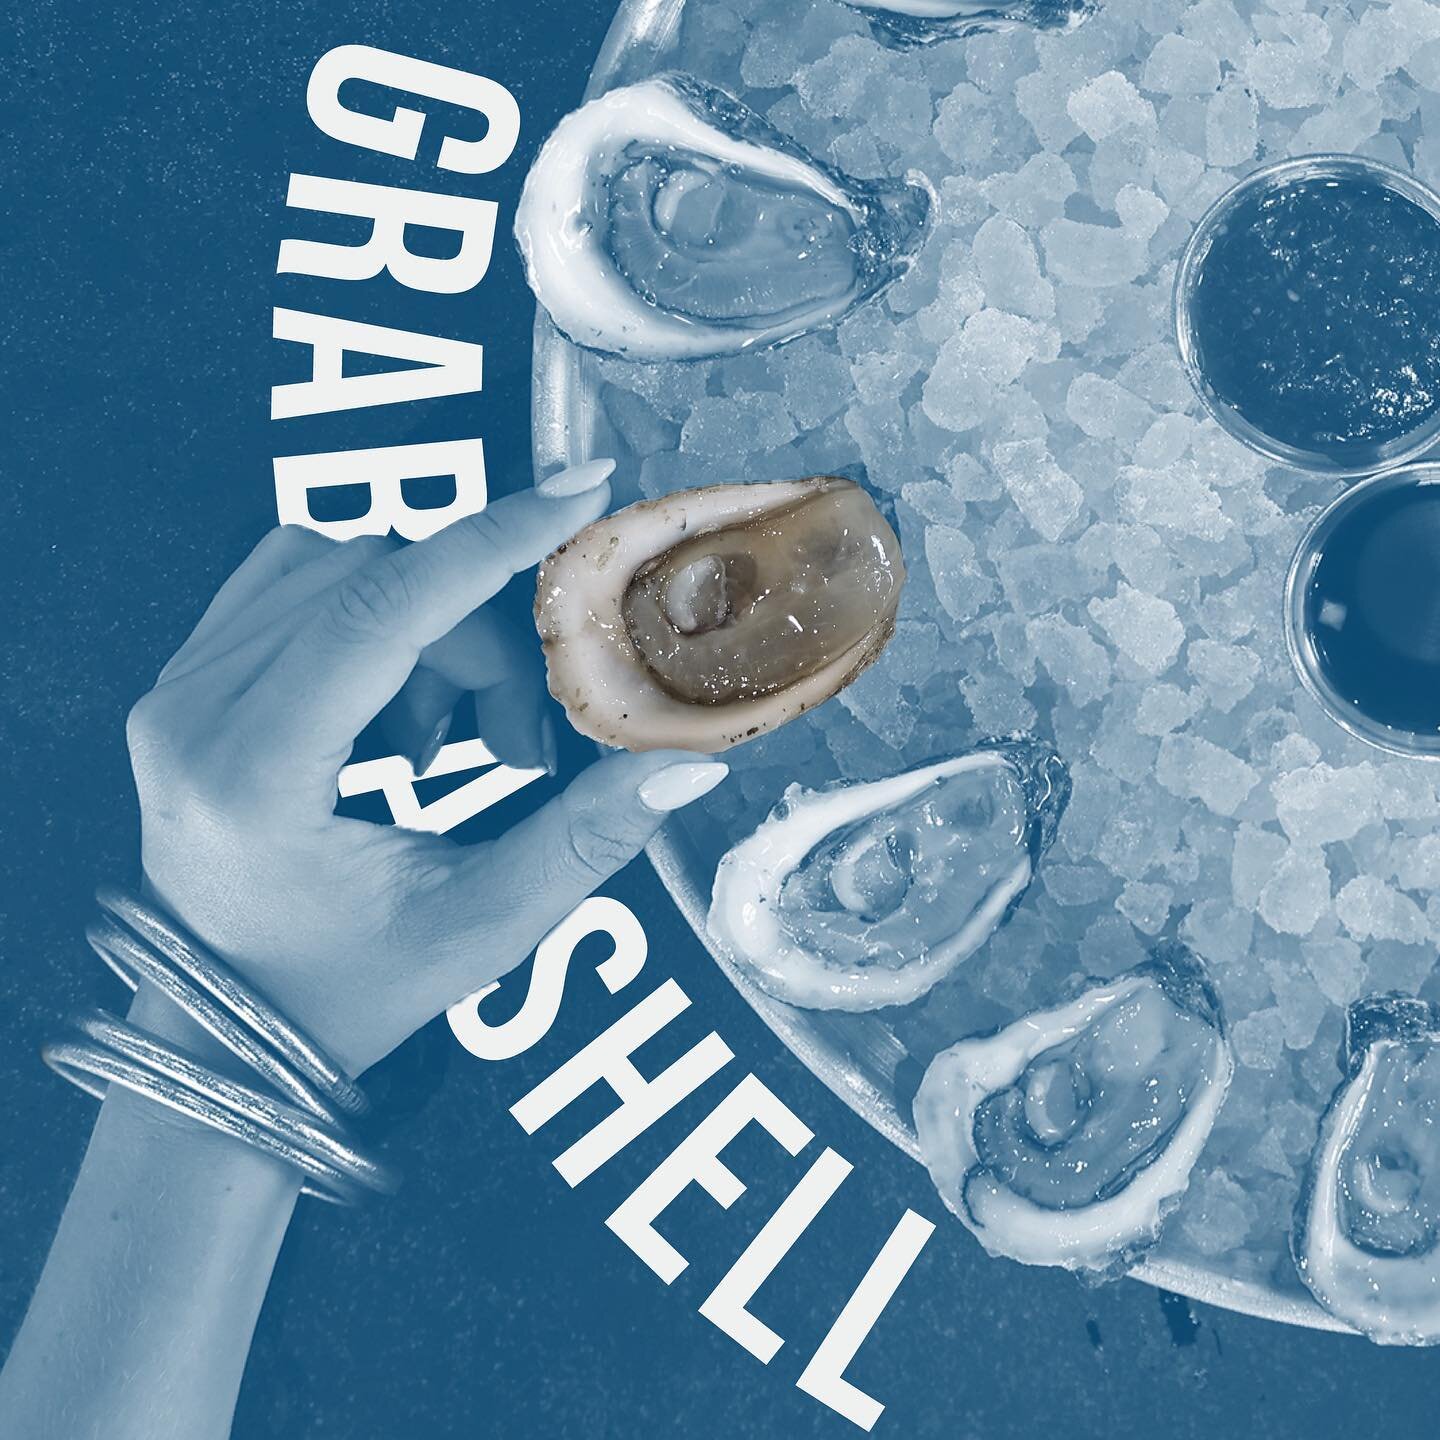 NATIONAL OYSTER DAY IS TOMORROW! 🦪 Celebrate with a dozen, super fresh oysters &amp; a killer craft cocktail. Grab a shell! See you at STIR!